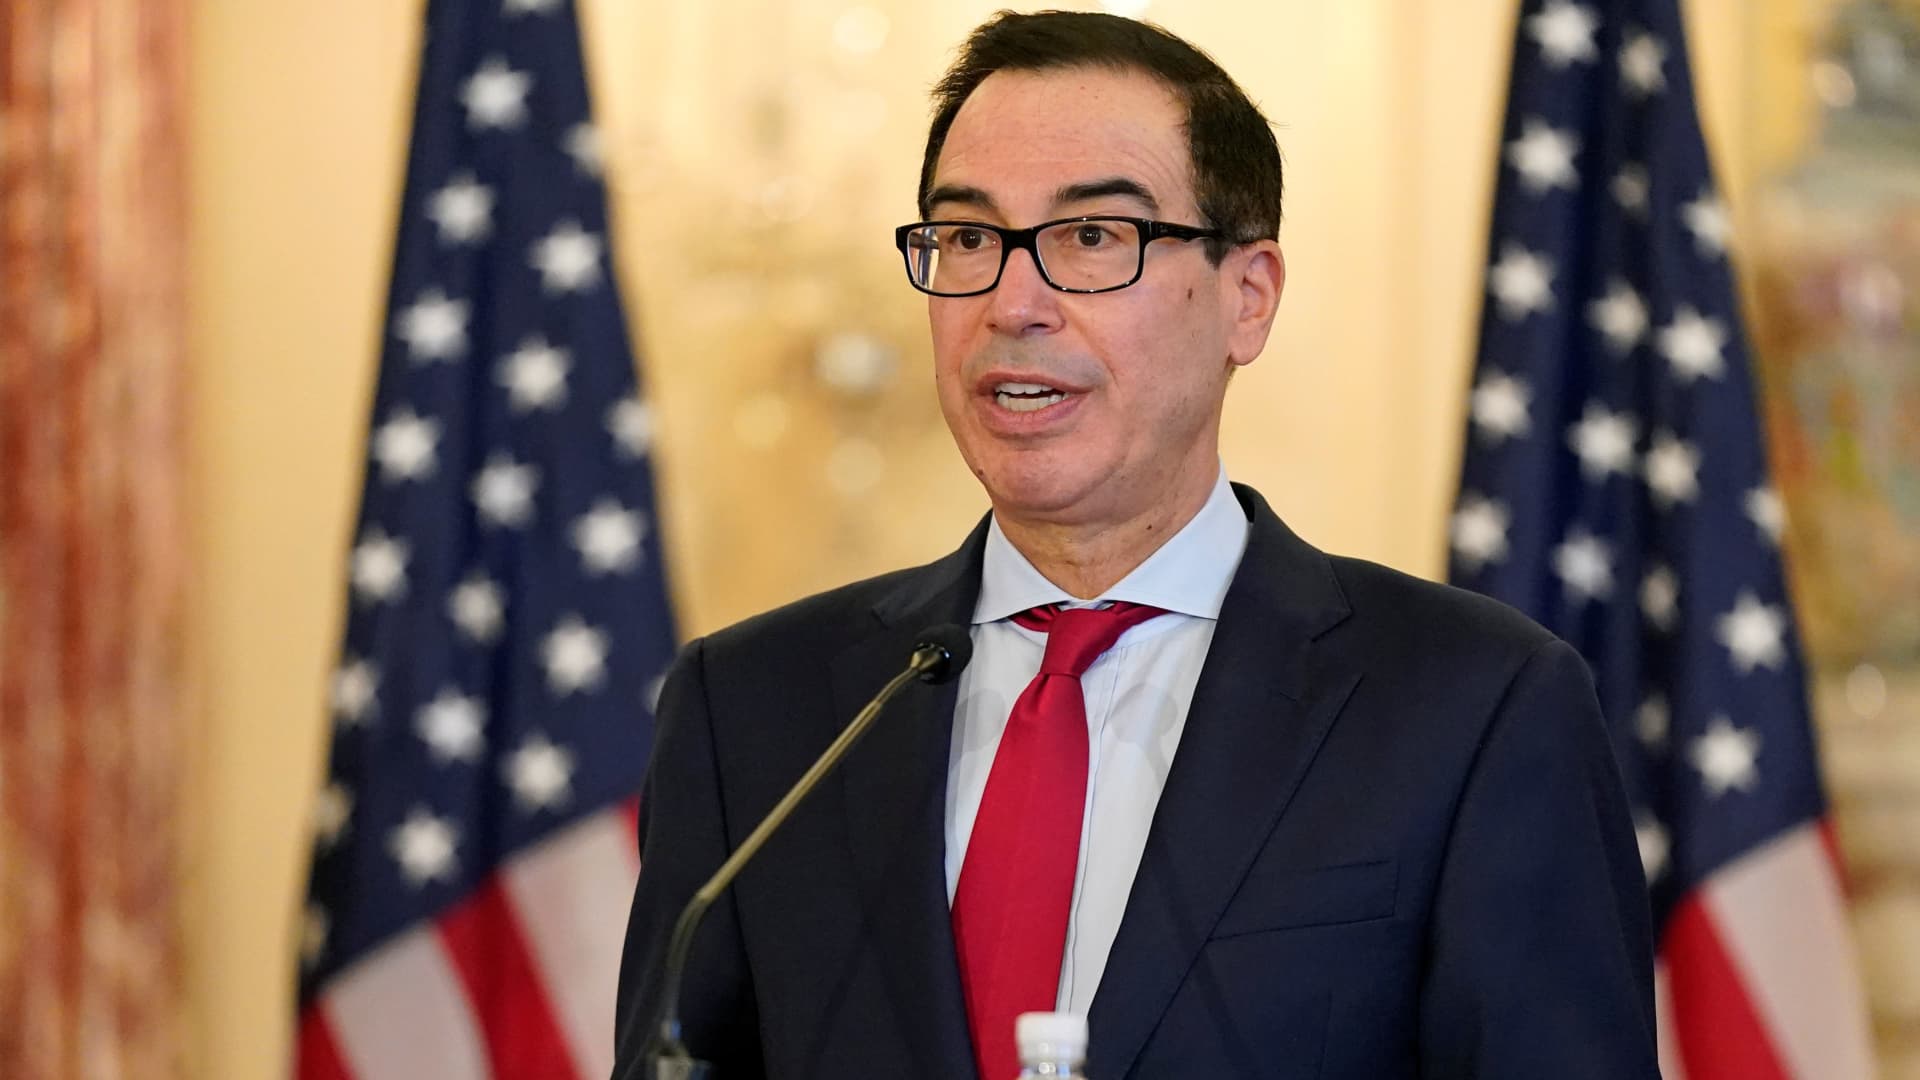 U.S. Treasury Secretary Steve Mnuchin speaks during a news conference to announce the Trump administration's restoration of sanctions on Iran, at the U.S. State Department in Washington, September 21, 2020.